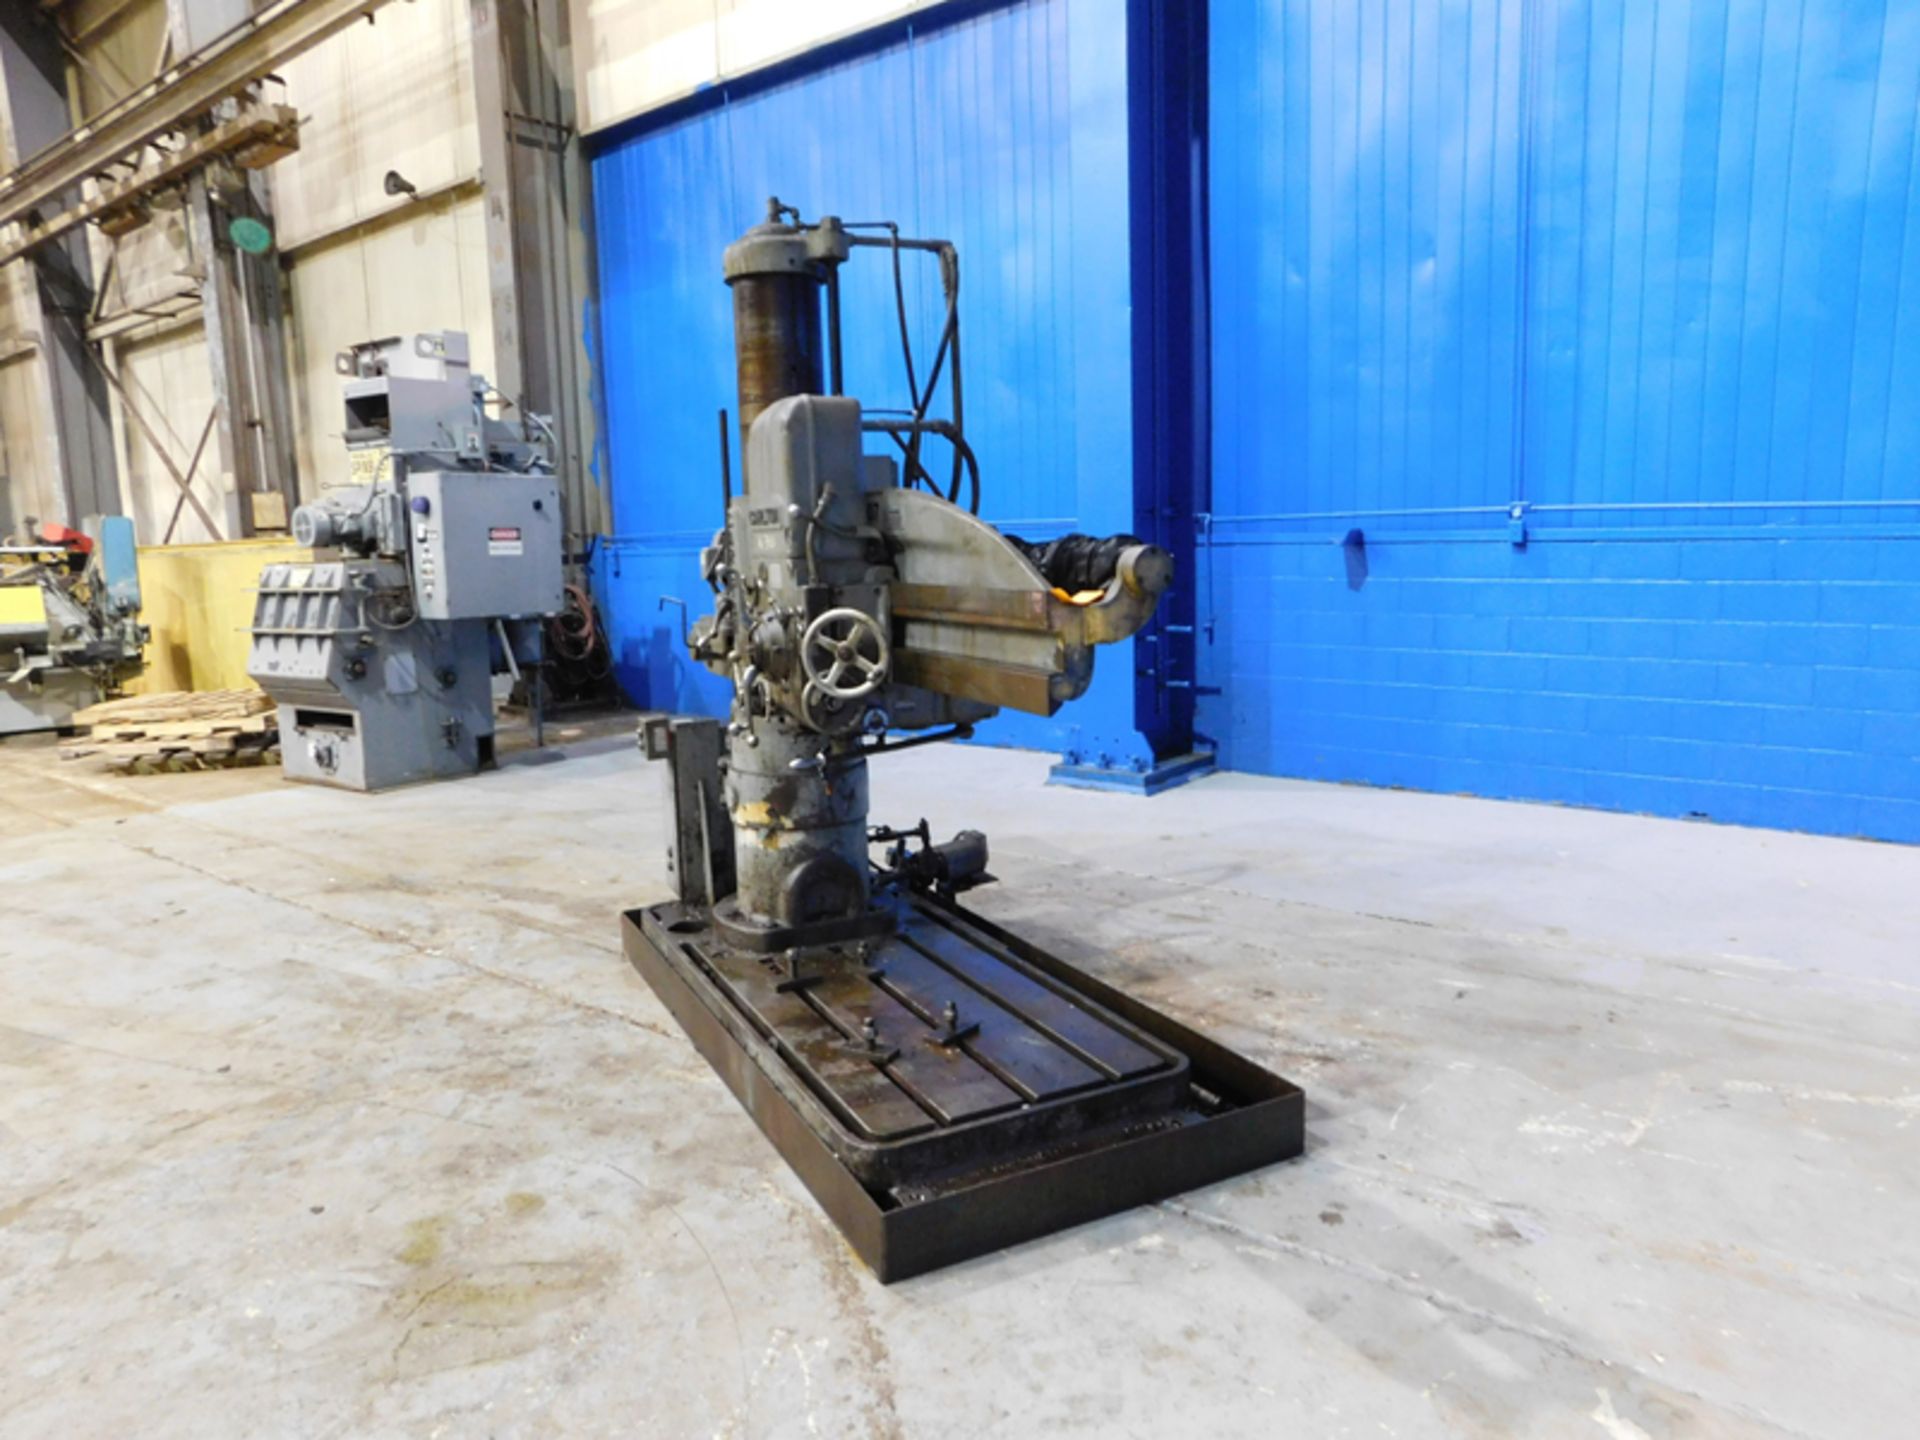 Carlton Radial Arm Drill | 4' x 9", Mdl: 1A, S/N: 4308, Located In: Painesville, OH - Image 2 of 9